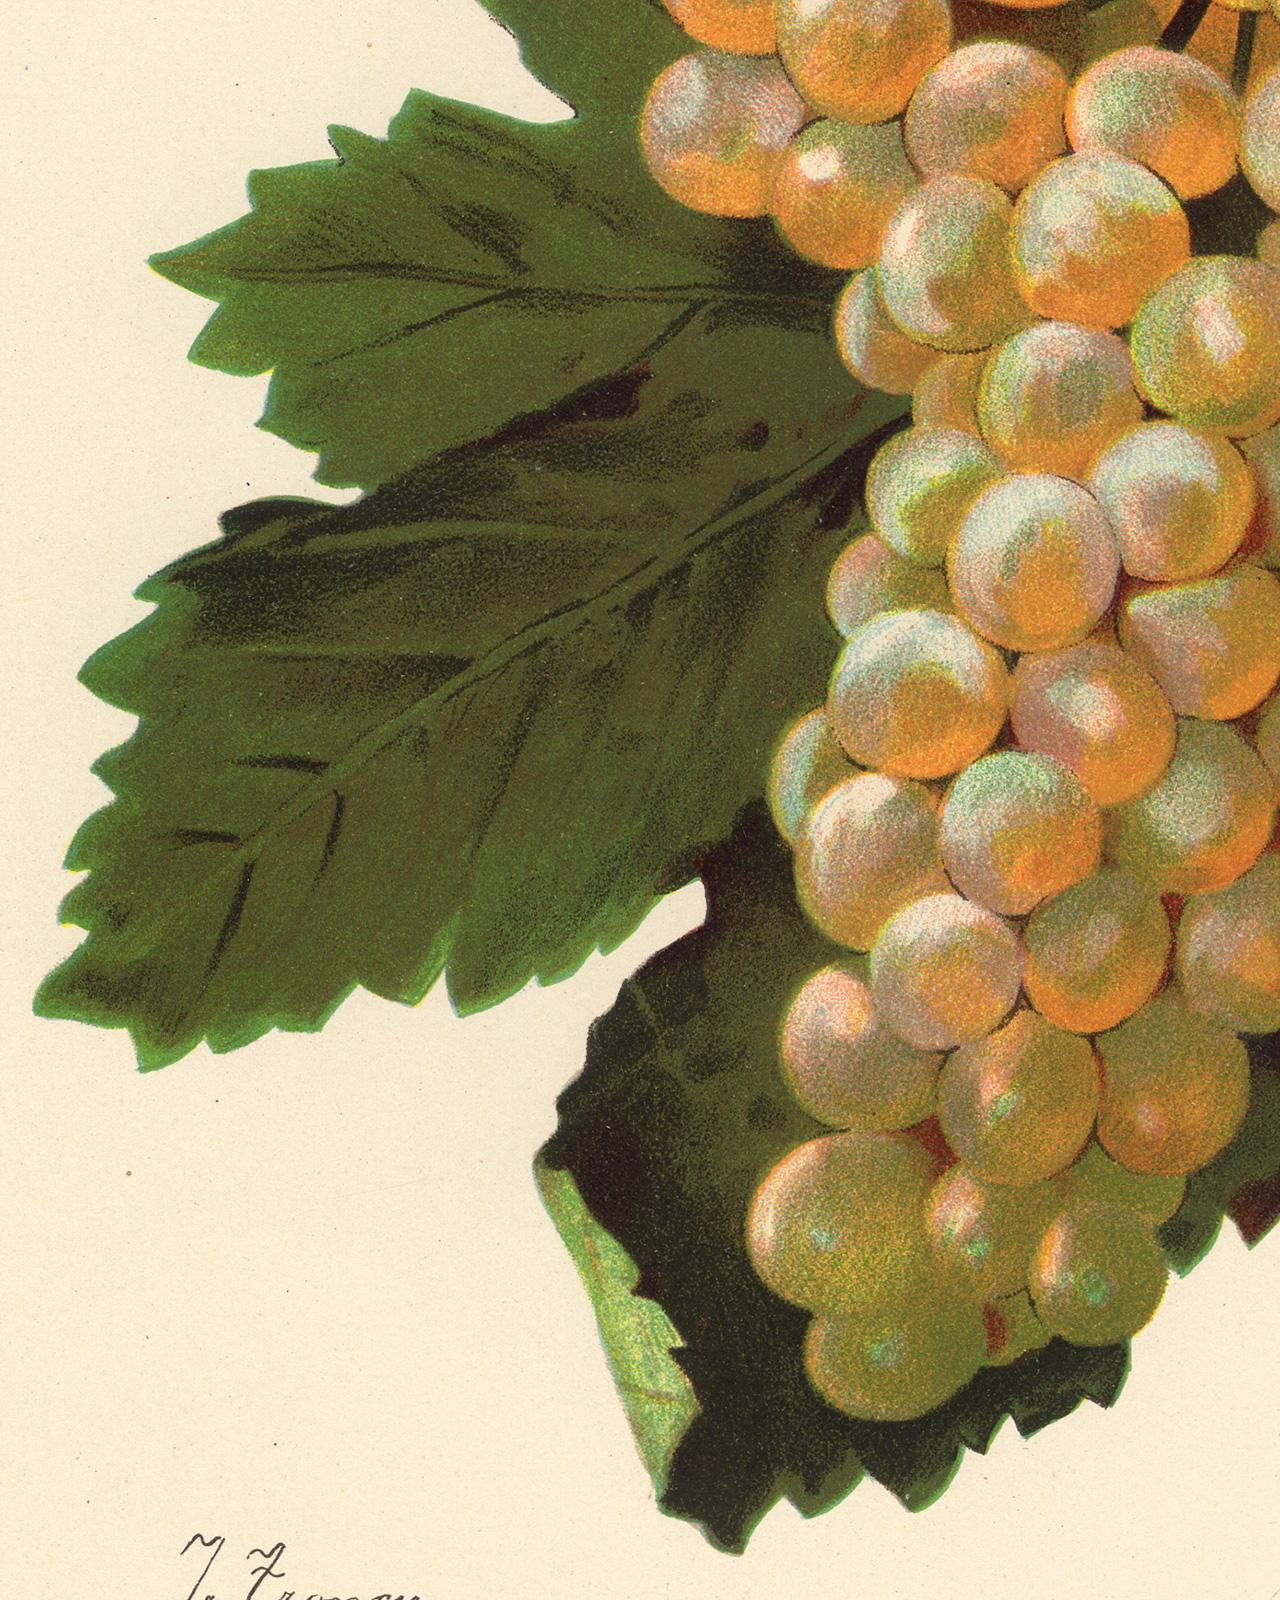 Verdat Blanc grape - from Ampelography by Vermorel - Lithograph - Early 20th c. - White Print by Victor Vermorel